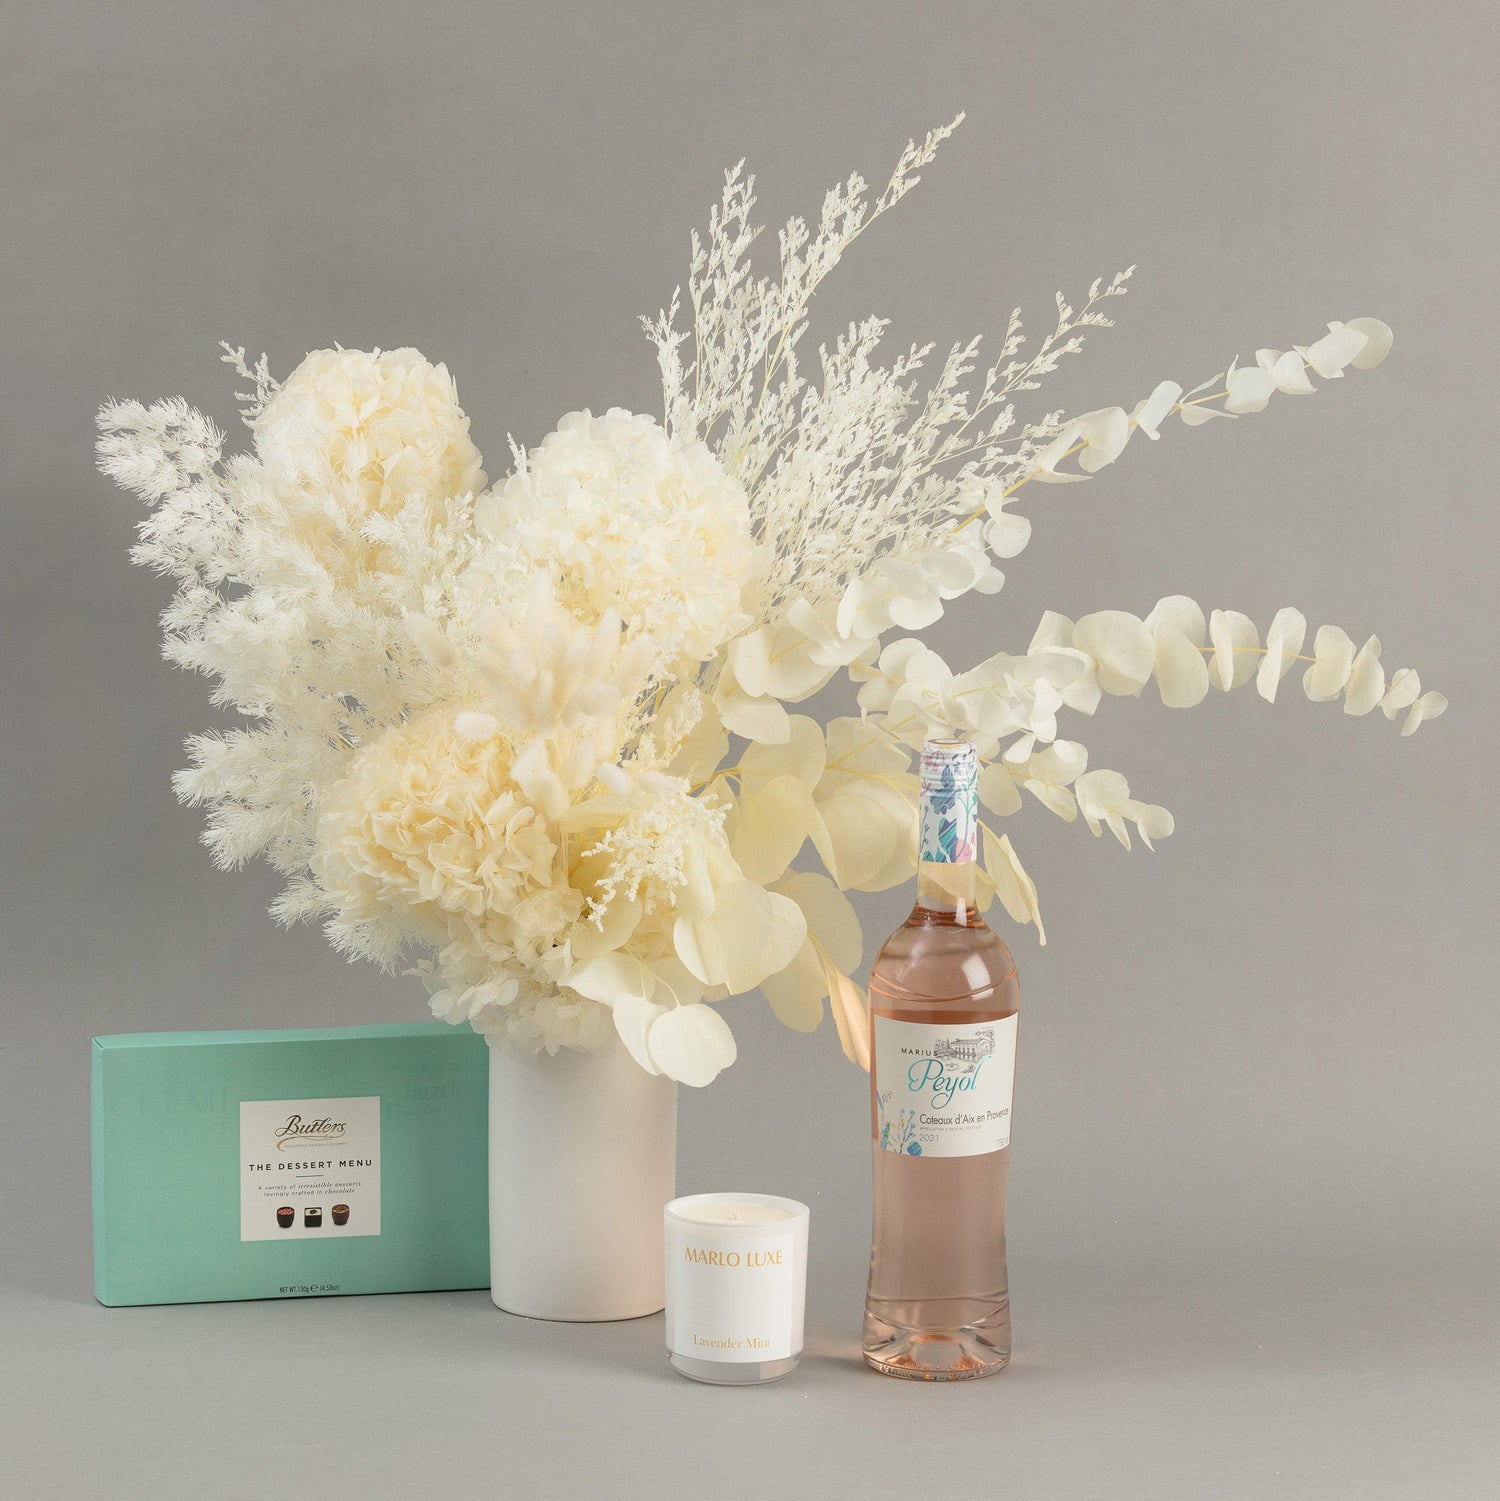 A gift package including a white ceramic vase with modern preserved flowers in cream colours, a box of premium chocolates, a bottle of wine and a candle.